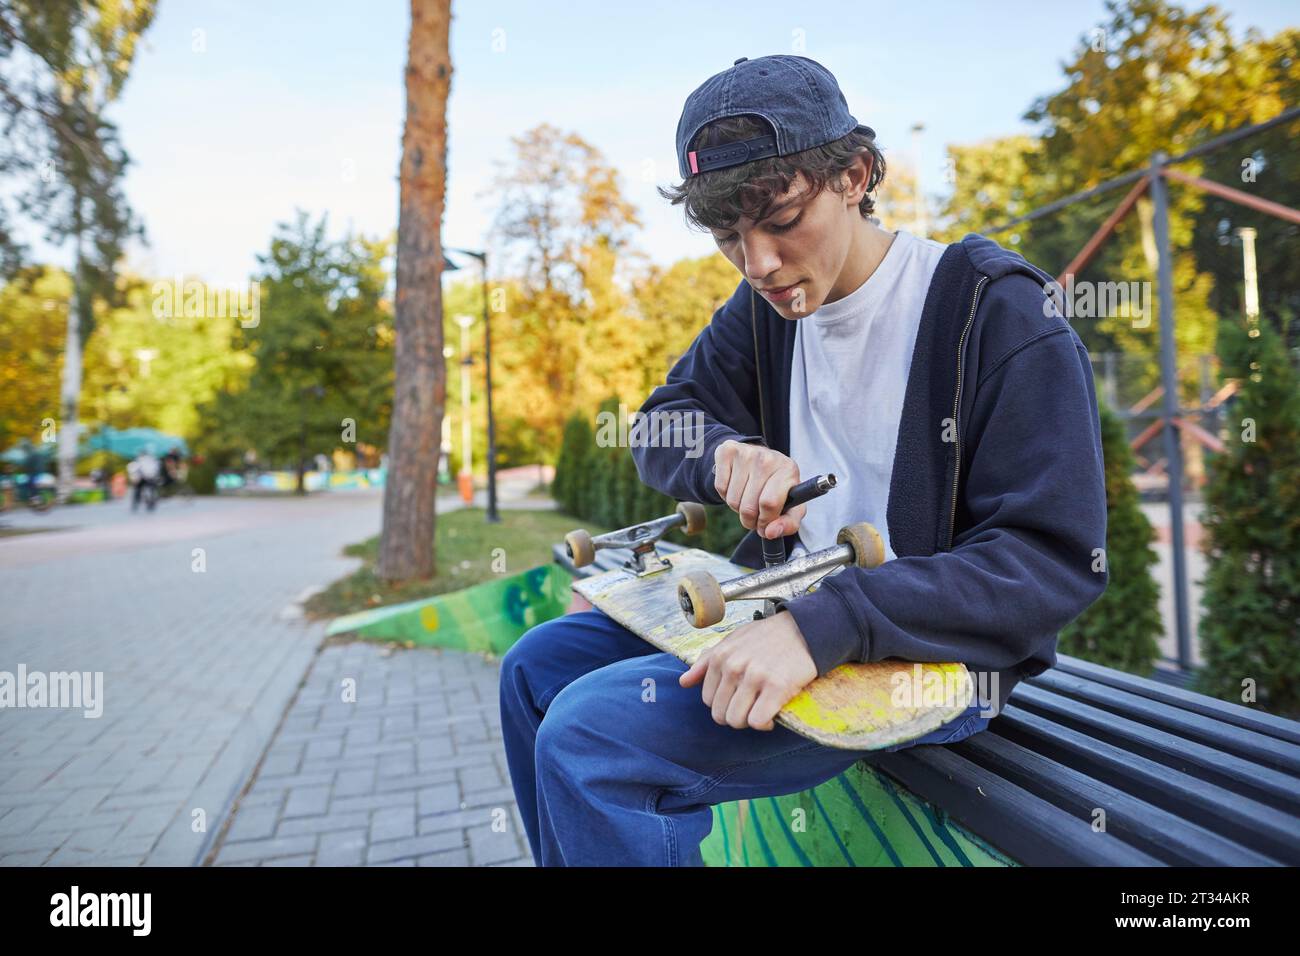 skateboarder repairing his skate in the park on a bench Stock Photo